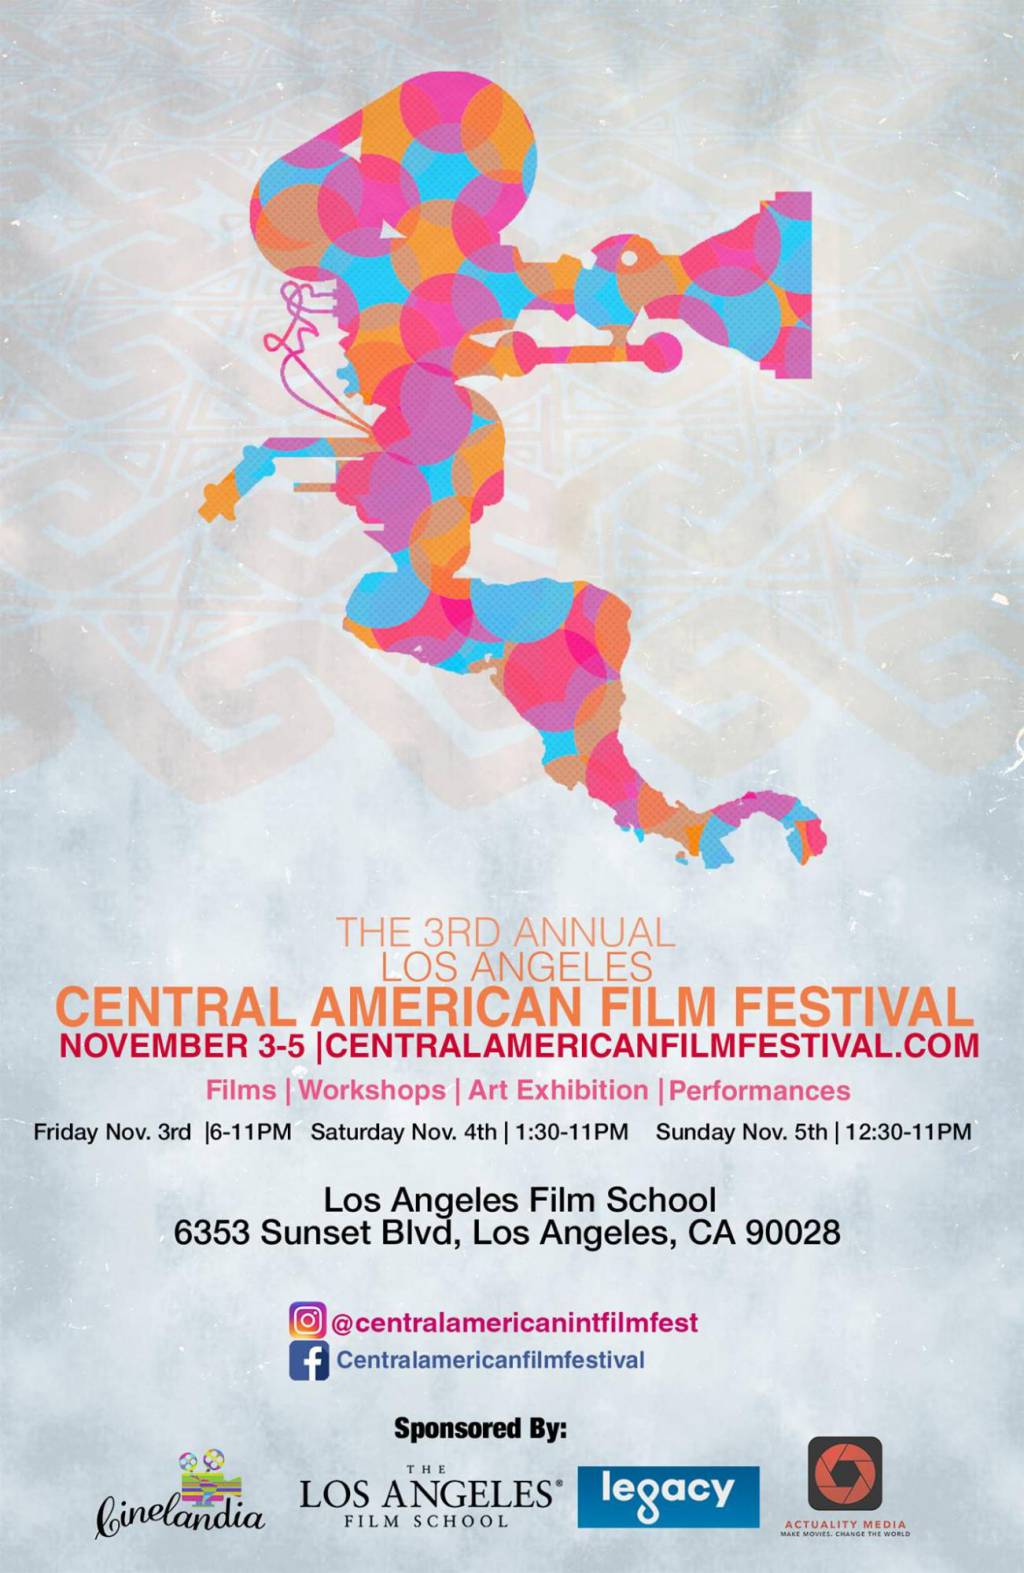 The 3rd Annual Central American International Film Festival in Los Angeles